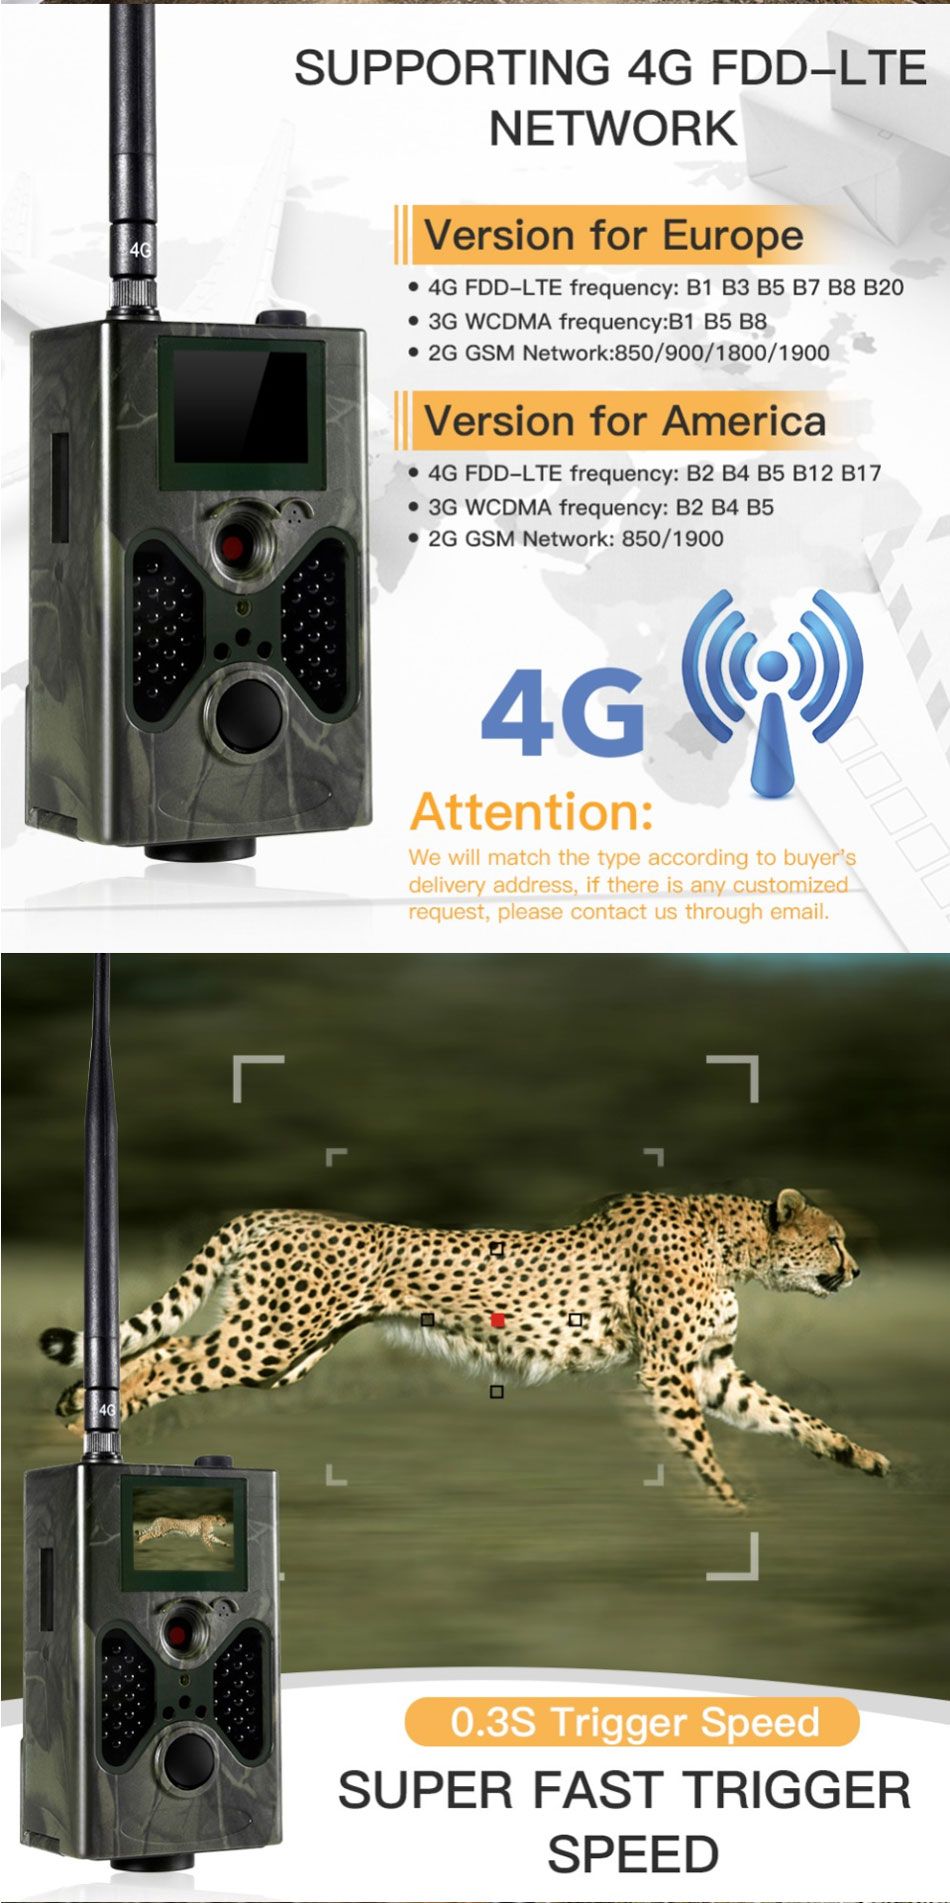 HC-330LTE-Waterproof-4G-16MP-1080P-SMTP-SMS-Infrared--Wildlife-Trail-Track-Hunting-Camera-Night-Vers-1447235